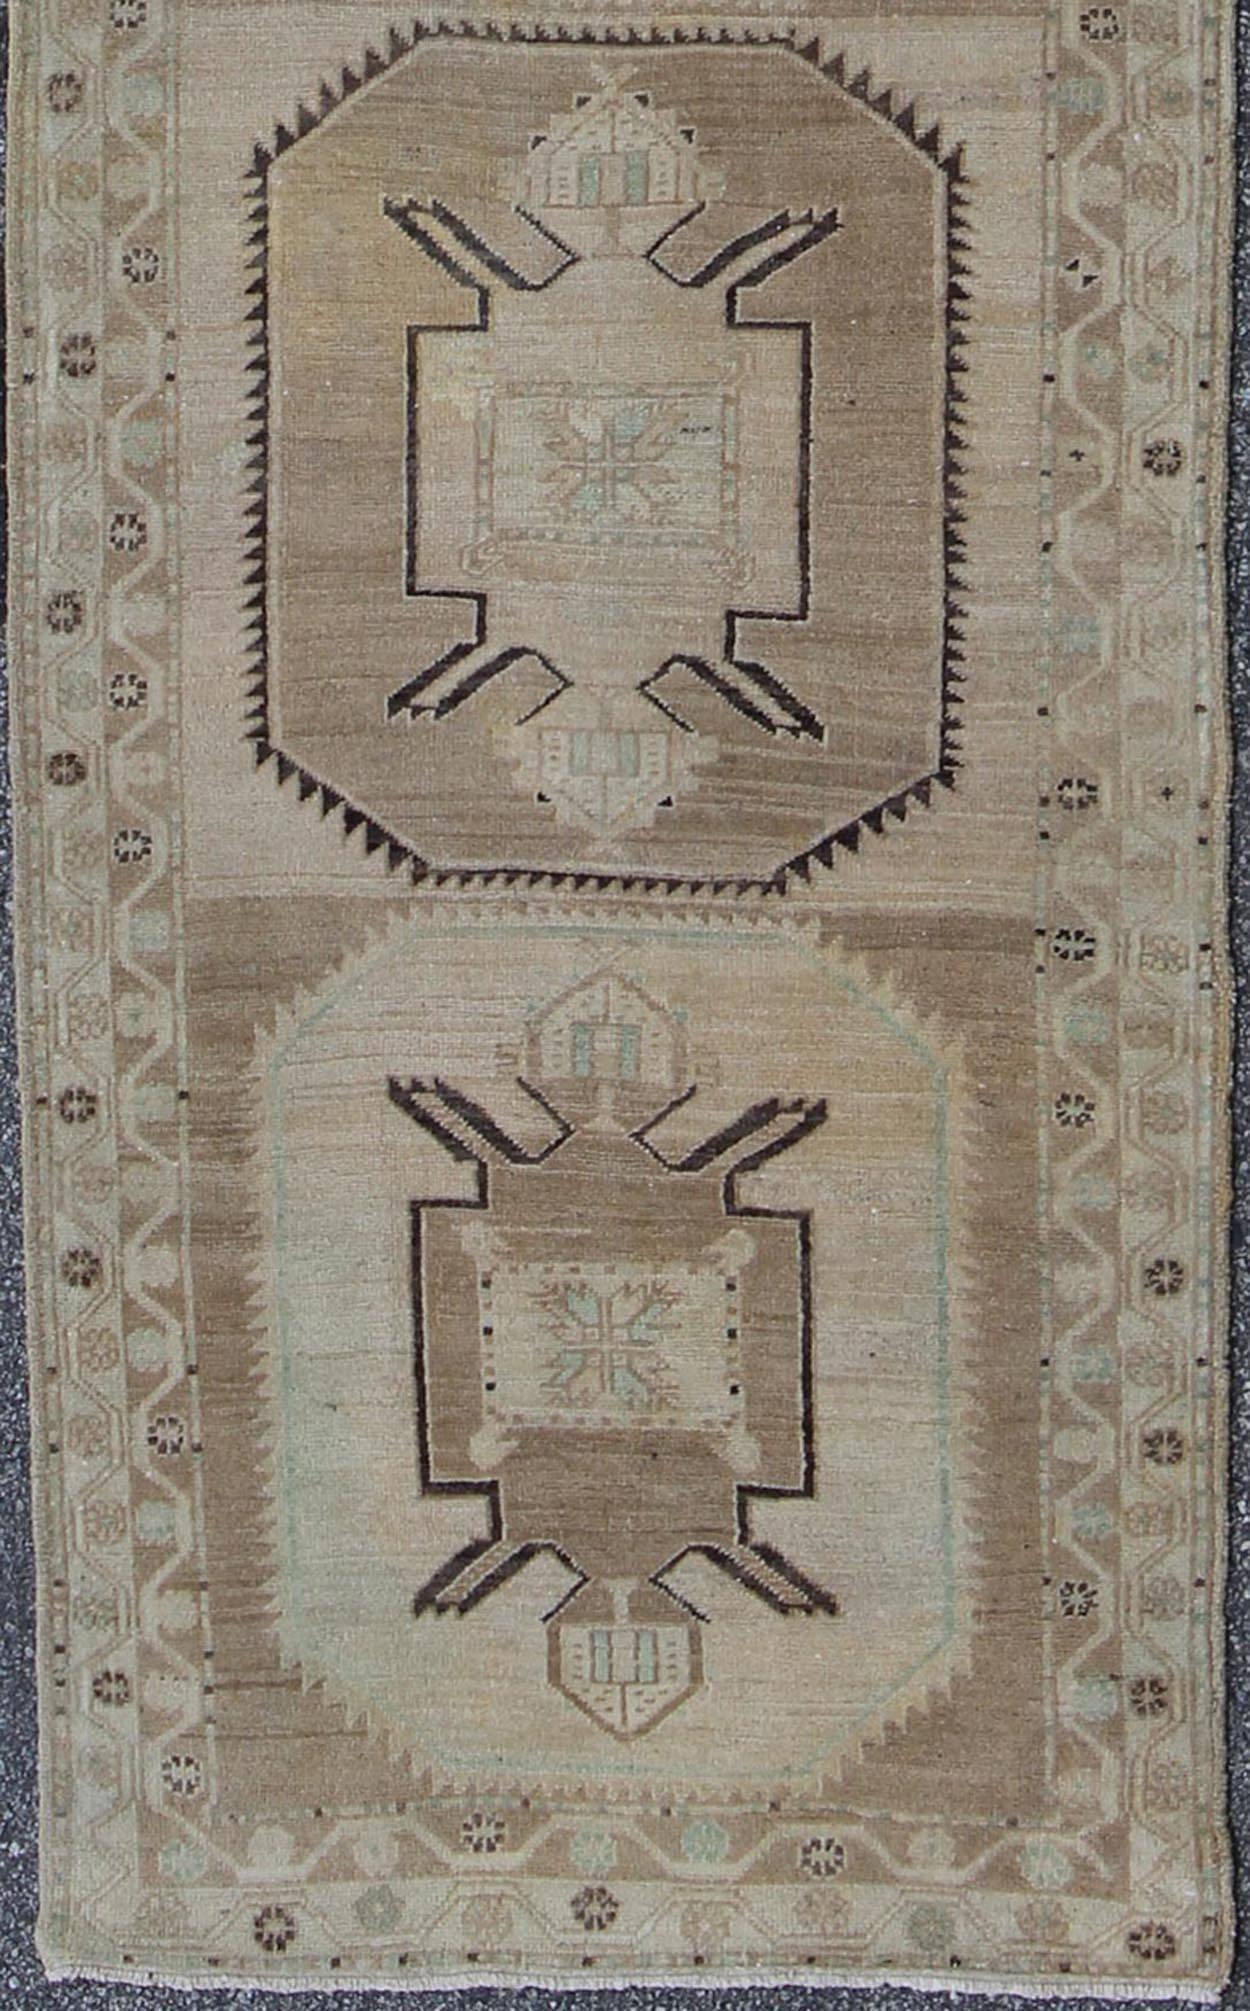 Oushak Runner with Geometric Design in Neutral Colors.
This compelling and unique Oushak runner was made in the middle years of the 20th century in Turkey. Characterized by a comely and highly representative Oushak composition, this carpet